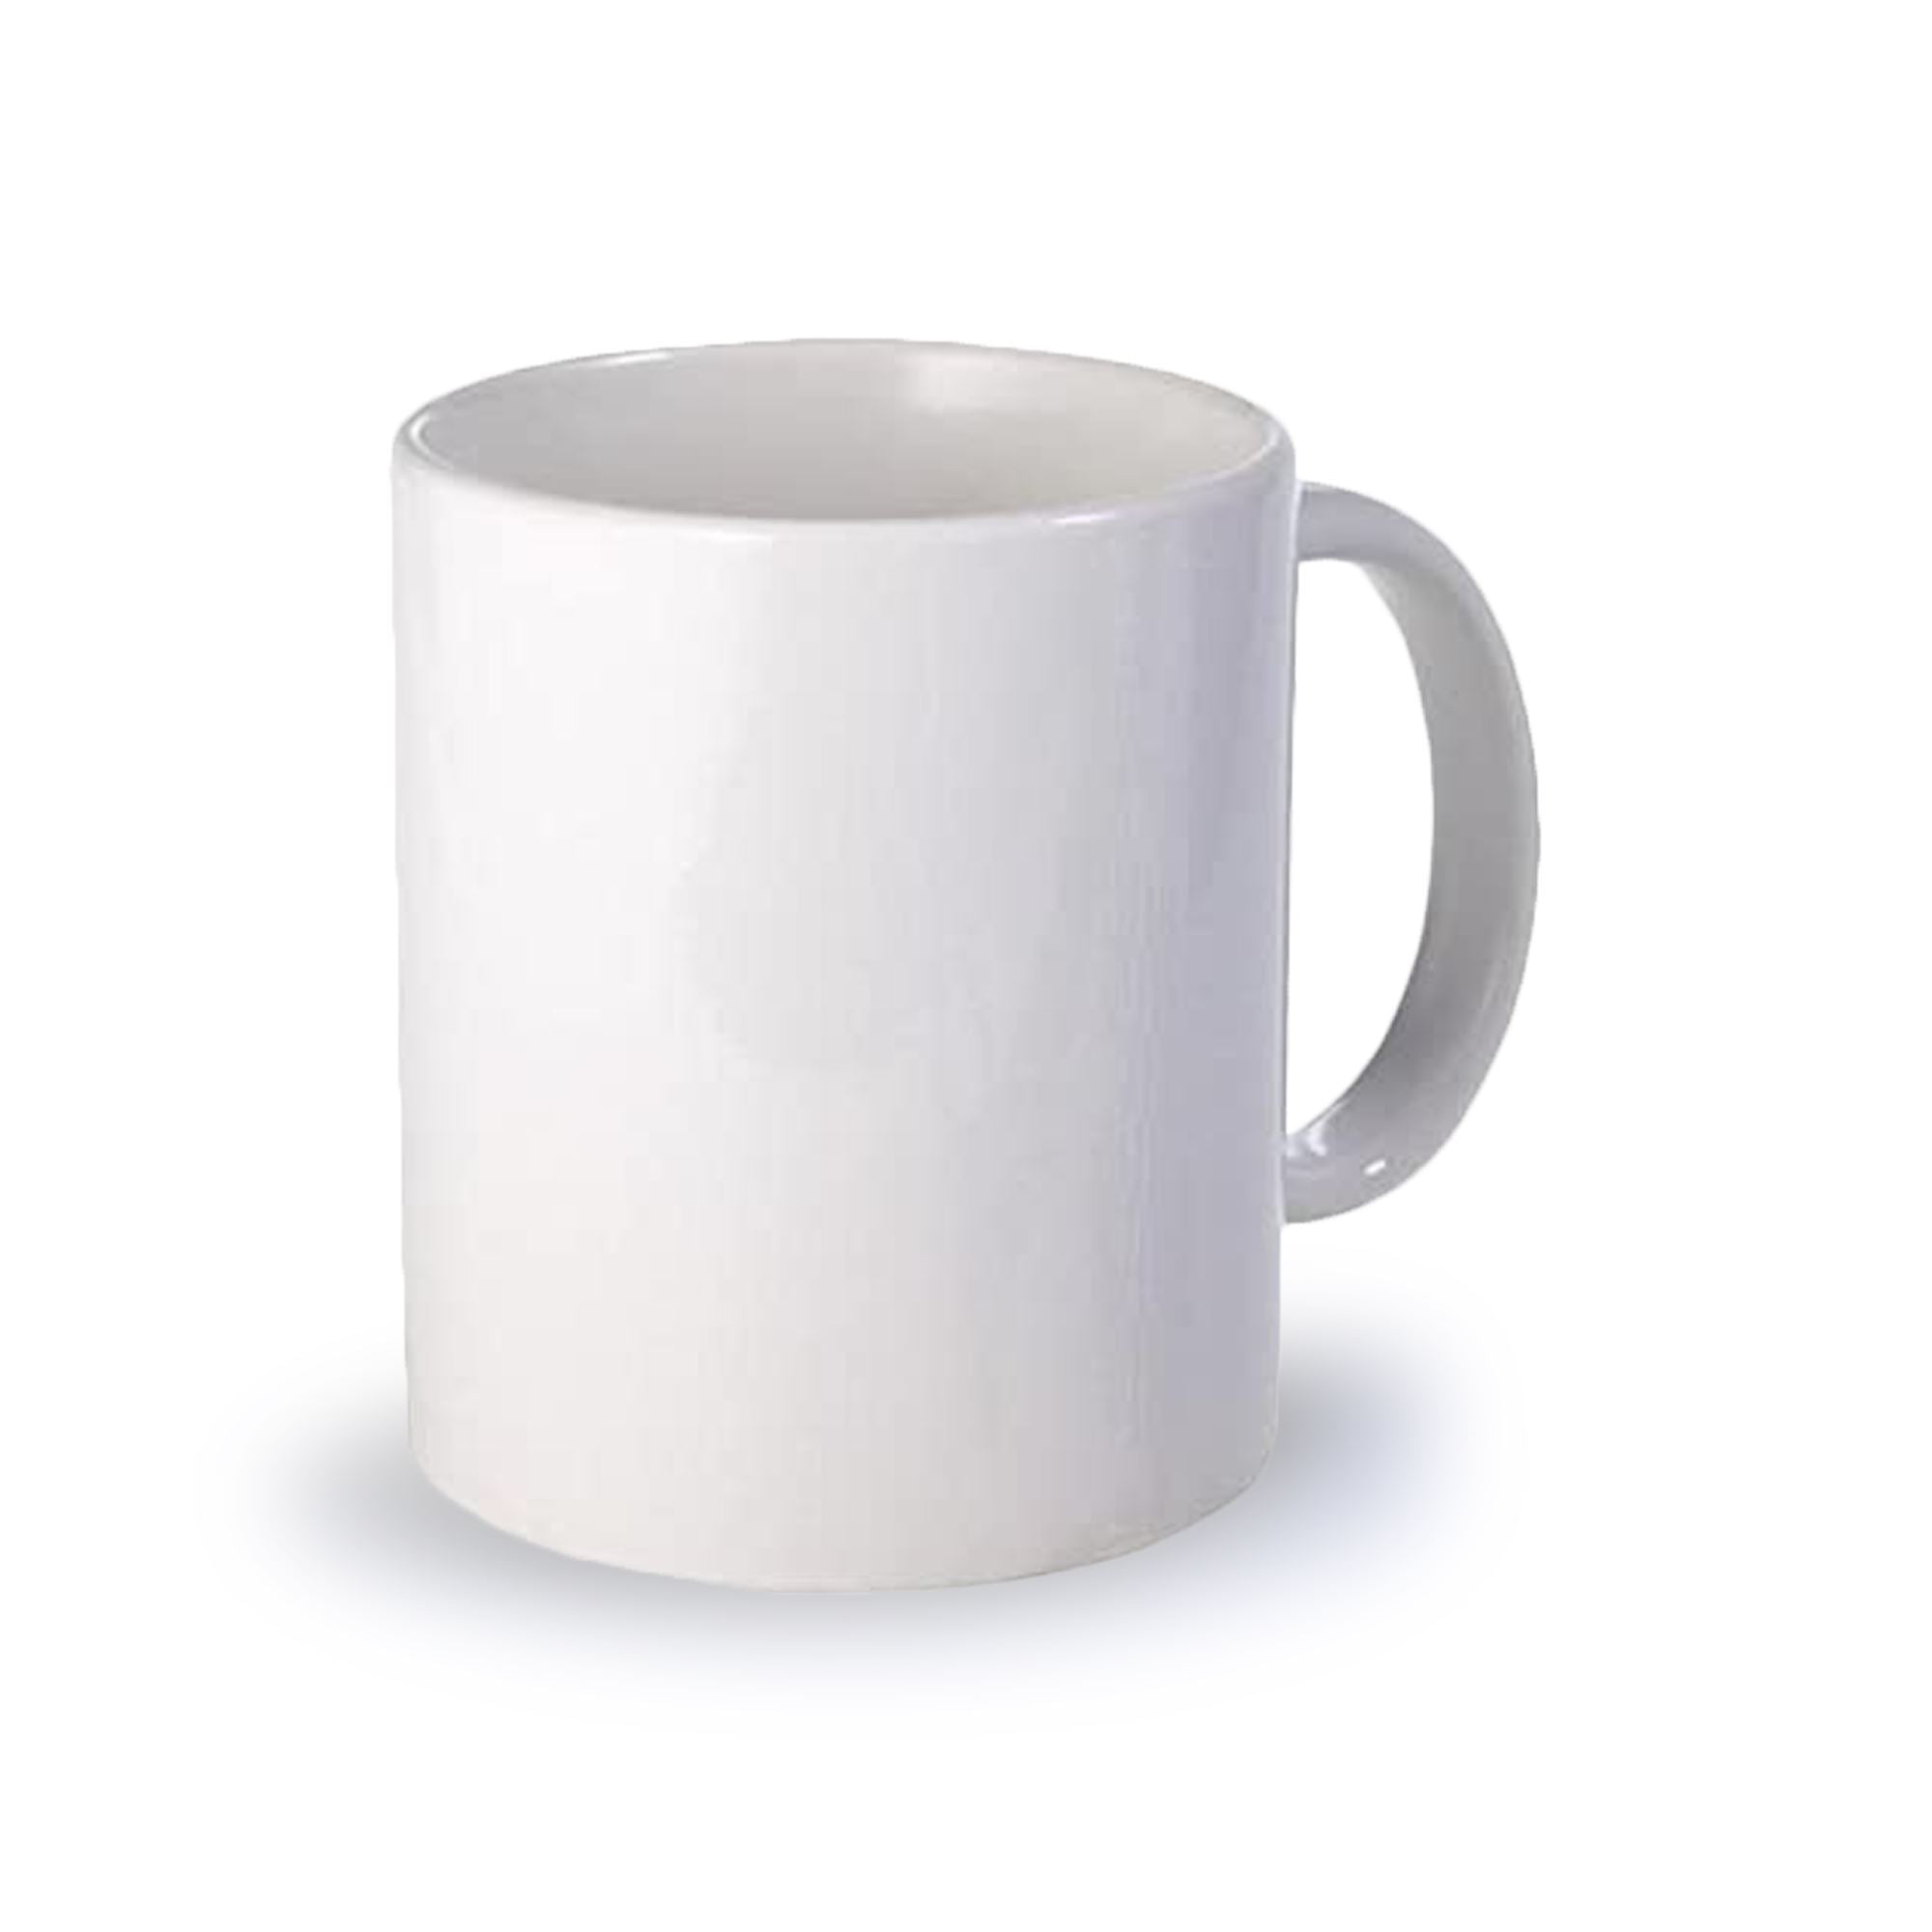 GBHOME Sublimation Mugs Blank, 12 OZ White Ceramic Sublimation Cups, Bulk  Mugs for Coffee, Milk, Latte, Hot Cocoa, Set of 12 - Off White